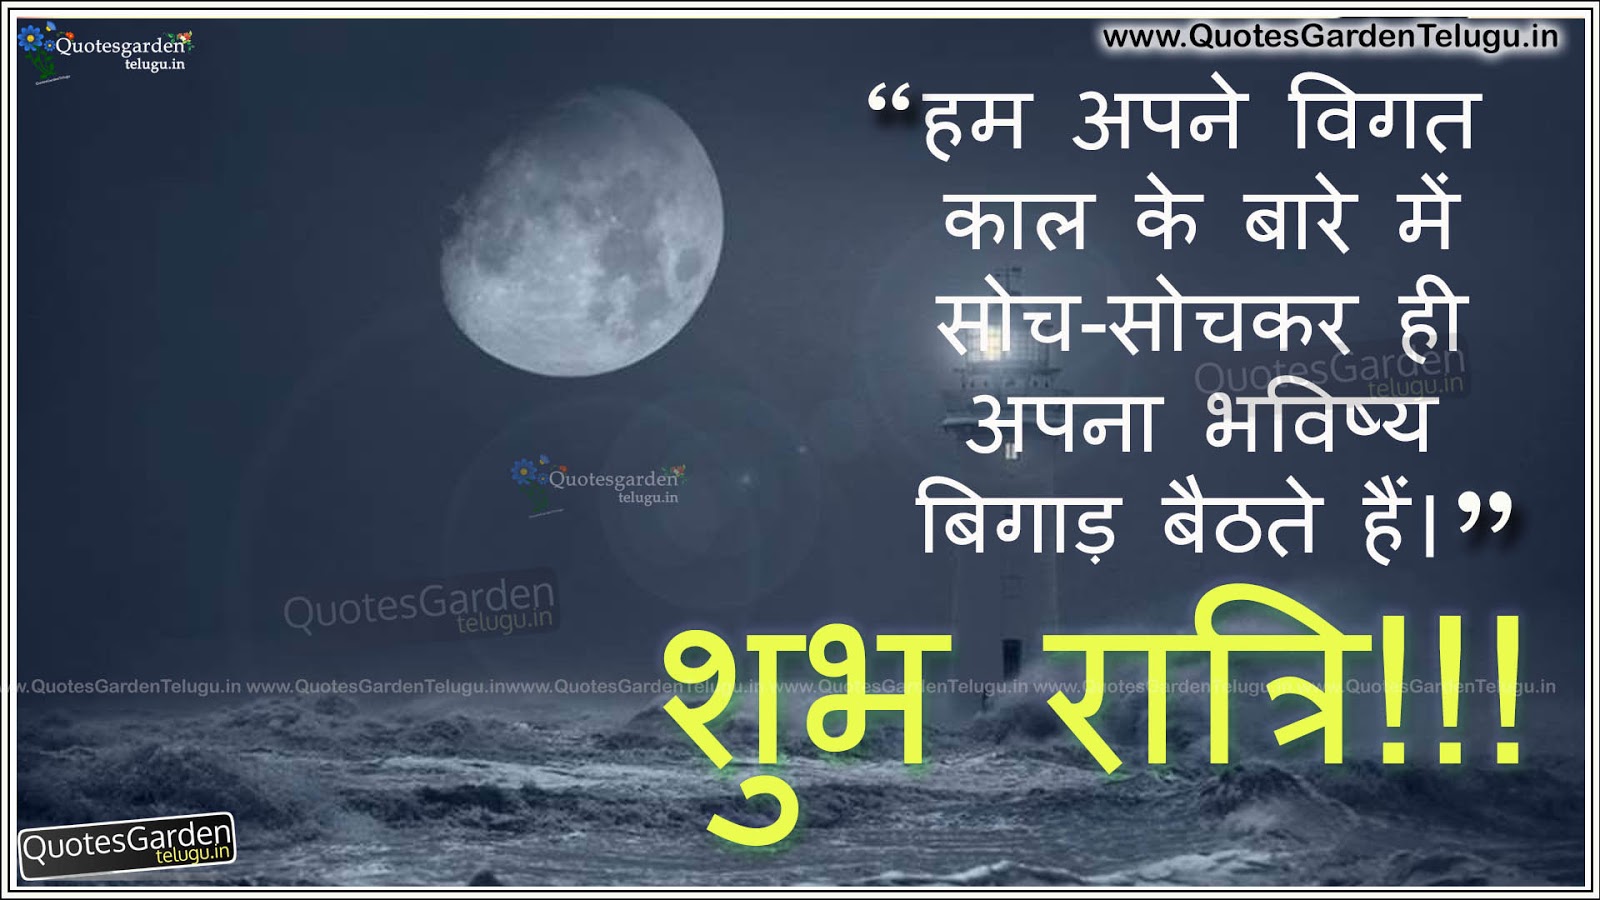 Best Good night Greetings in hindi with anmol vachan | QUOTES GARDEN TELUGU  | Telugu Quotes | English Quotes | Hindi Quotes |